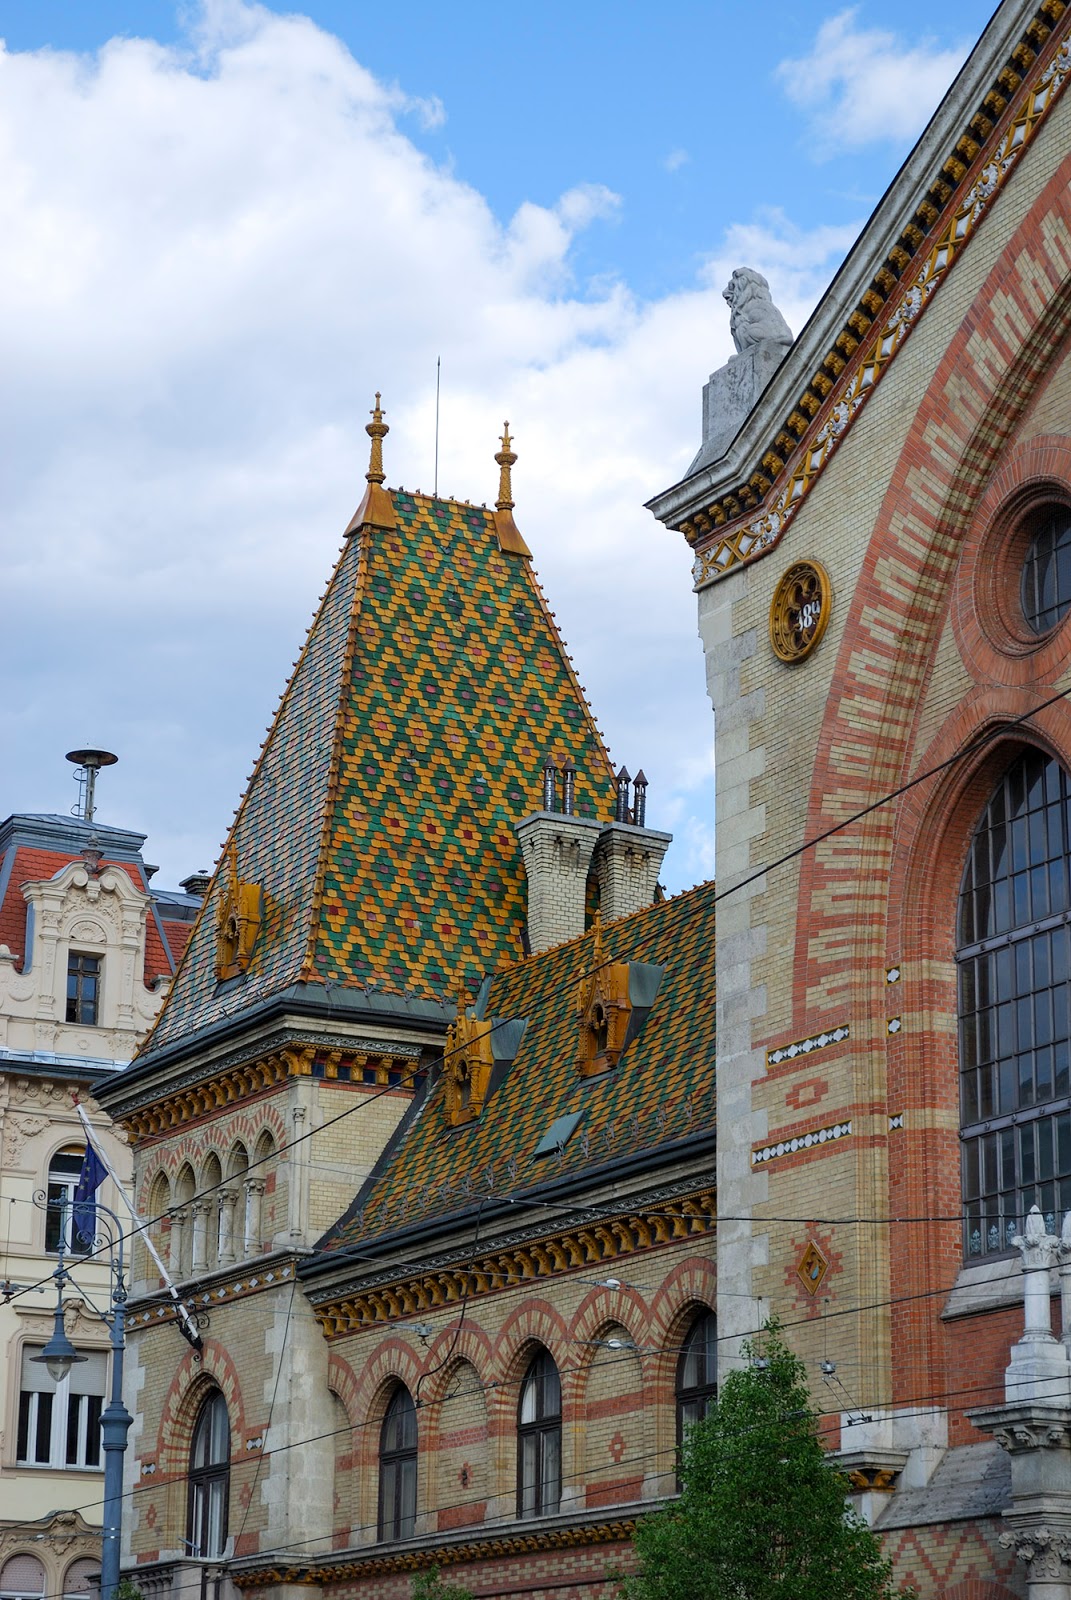 central market budapest guide itinerary instagram worthy spot sights landmarks hungary